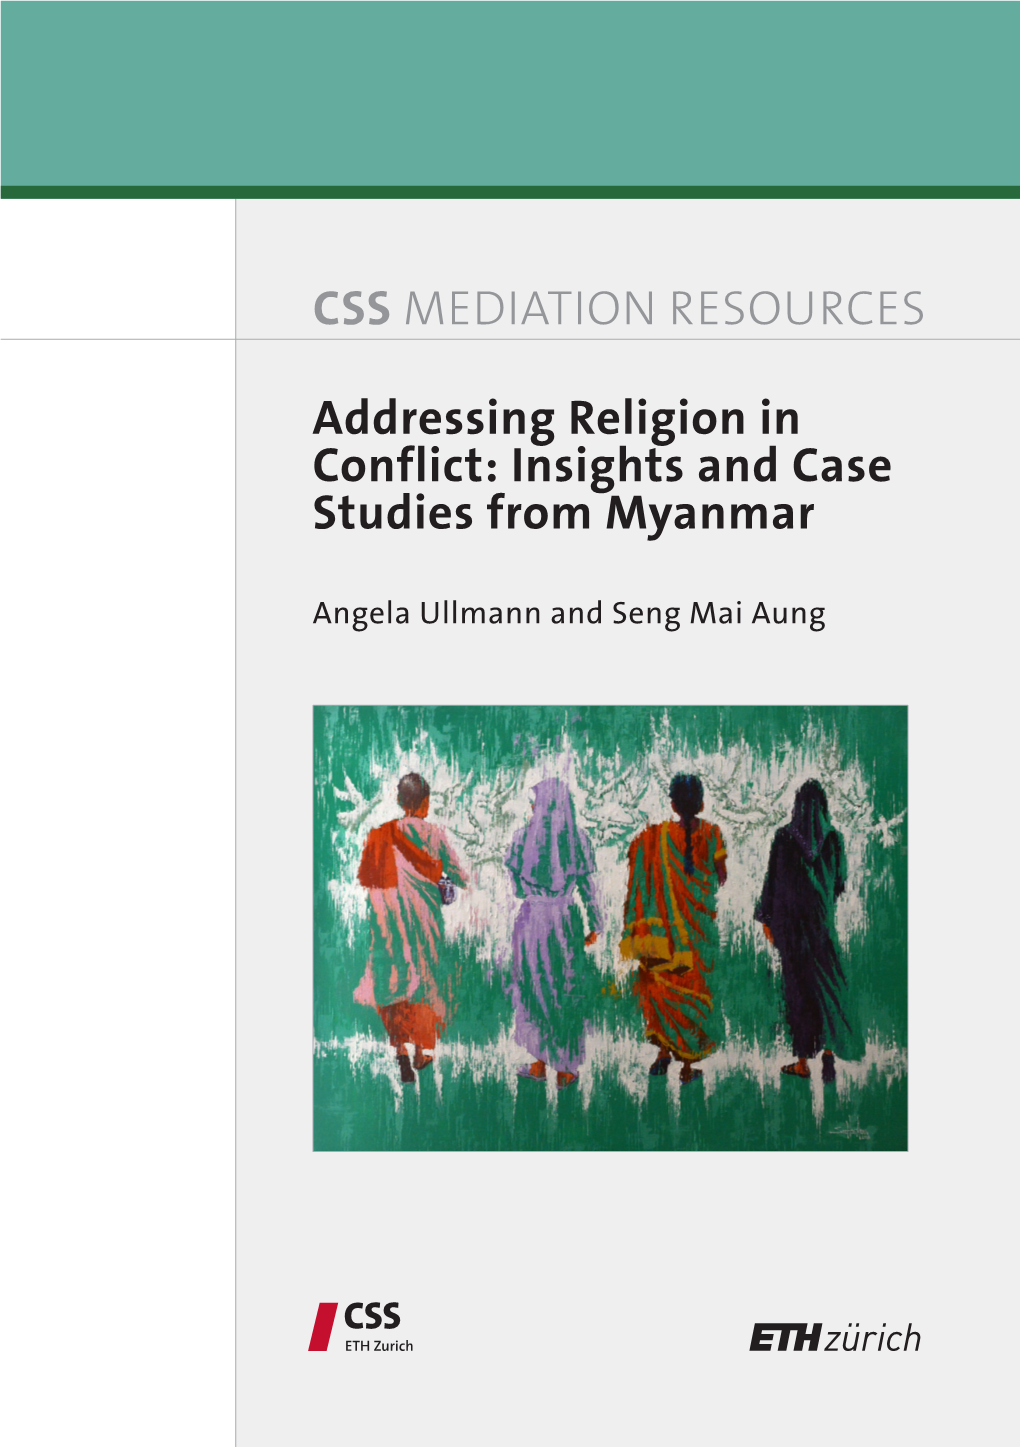 CSS MEDIATION RESOURCES Addressing Religion in Conflict